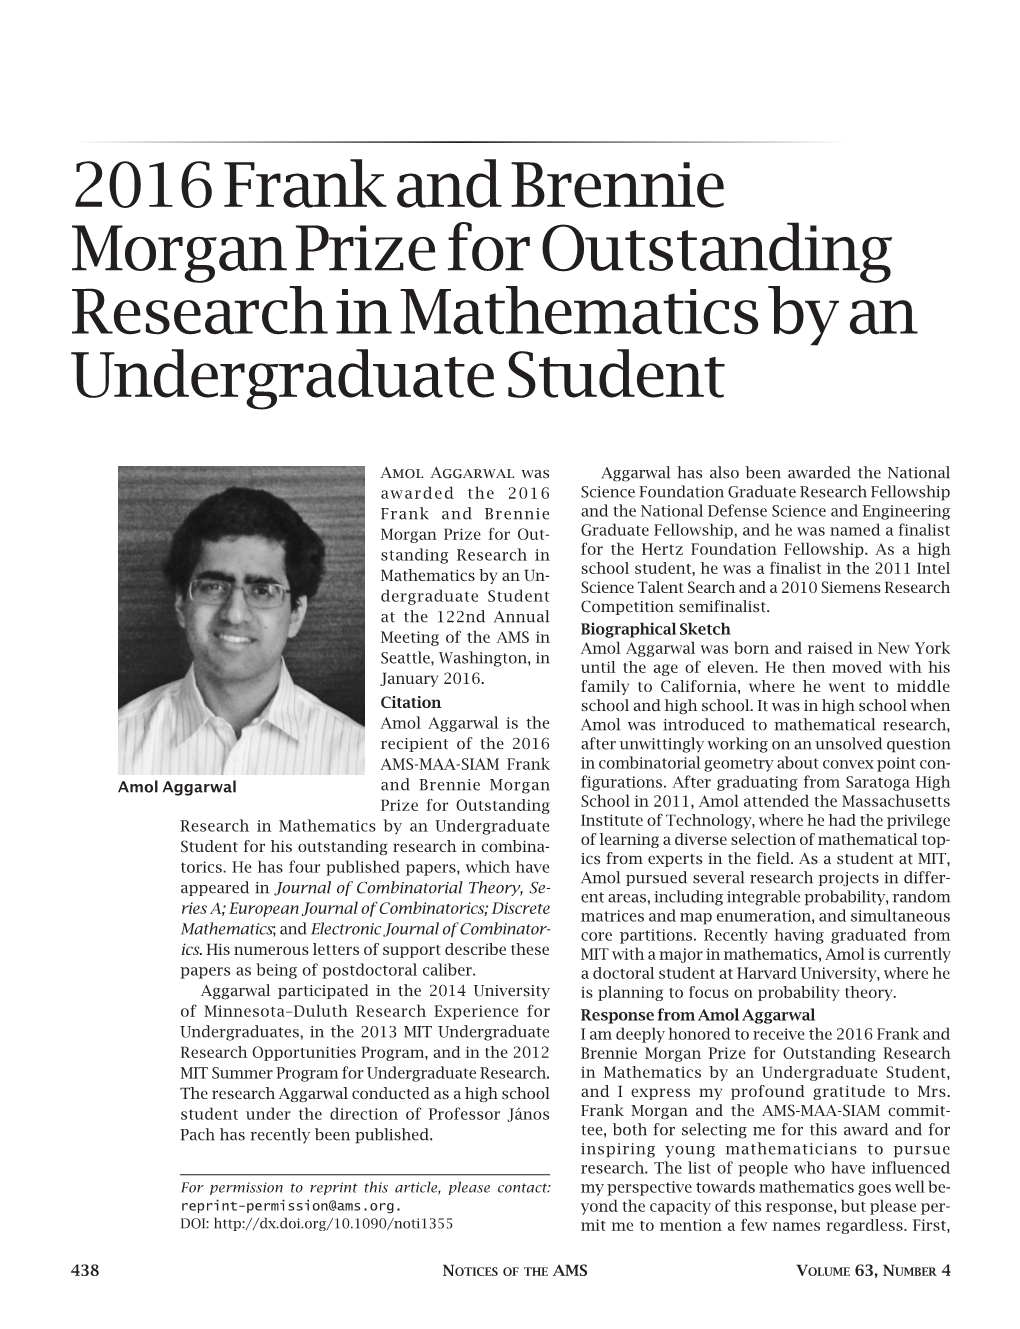 2016 Frank and Brennie Morgan Prize for Outstanding Research in Mathematics by an Undergraduate Student